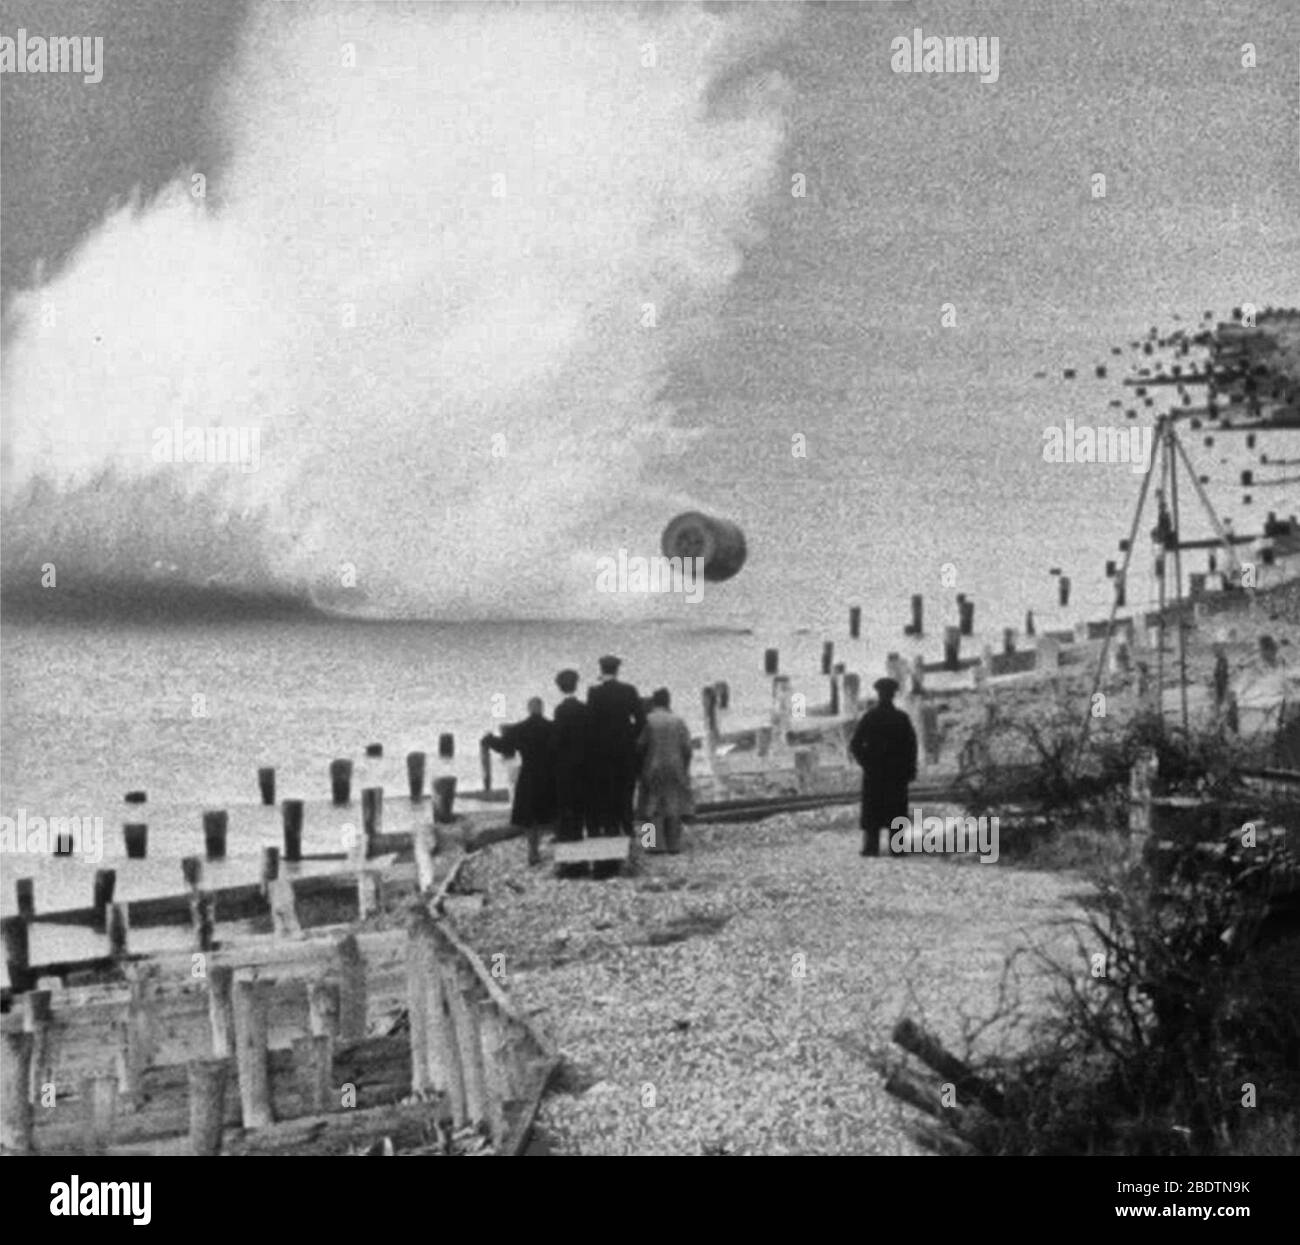 Movie still, showing an inert, practice version of the Upkeep bouncing bomb being dropped during a training flight by members of RAF 617 Squadron at Reculver bombing range, Kent. The bomb's designer, Barnes Wallis, and others watch the practice bomb strike the shoreline. 1943 Stock Photo